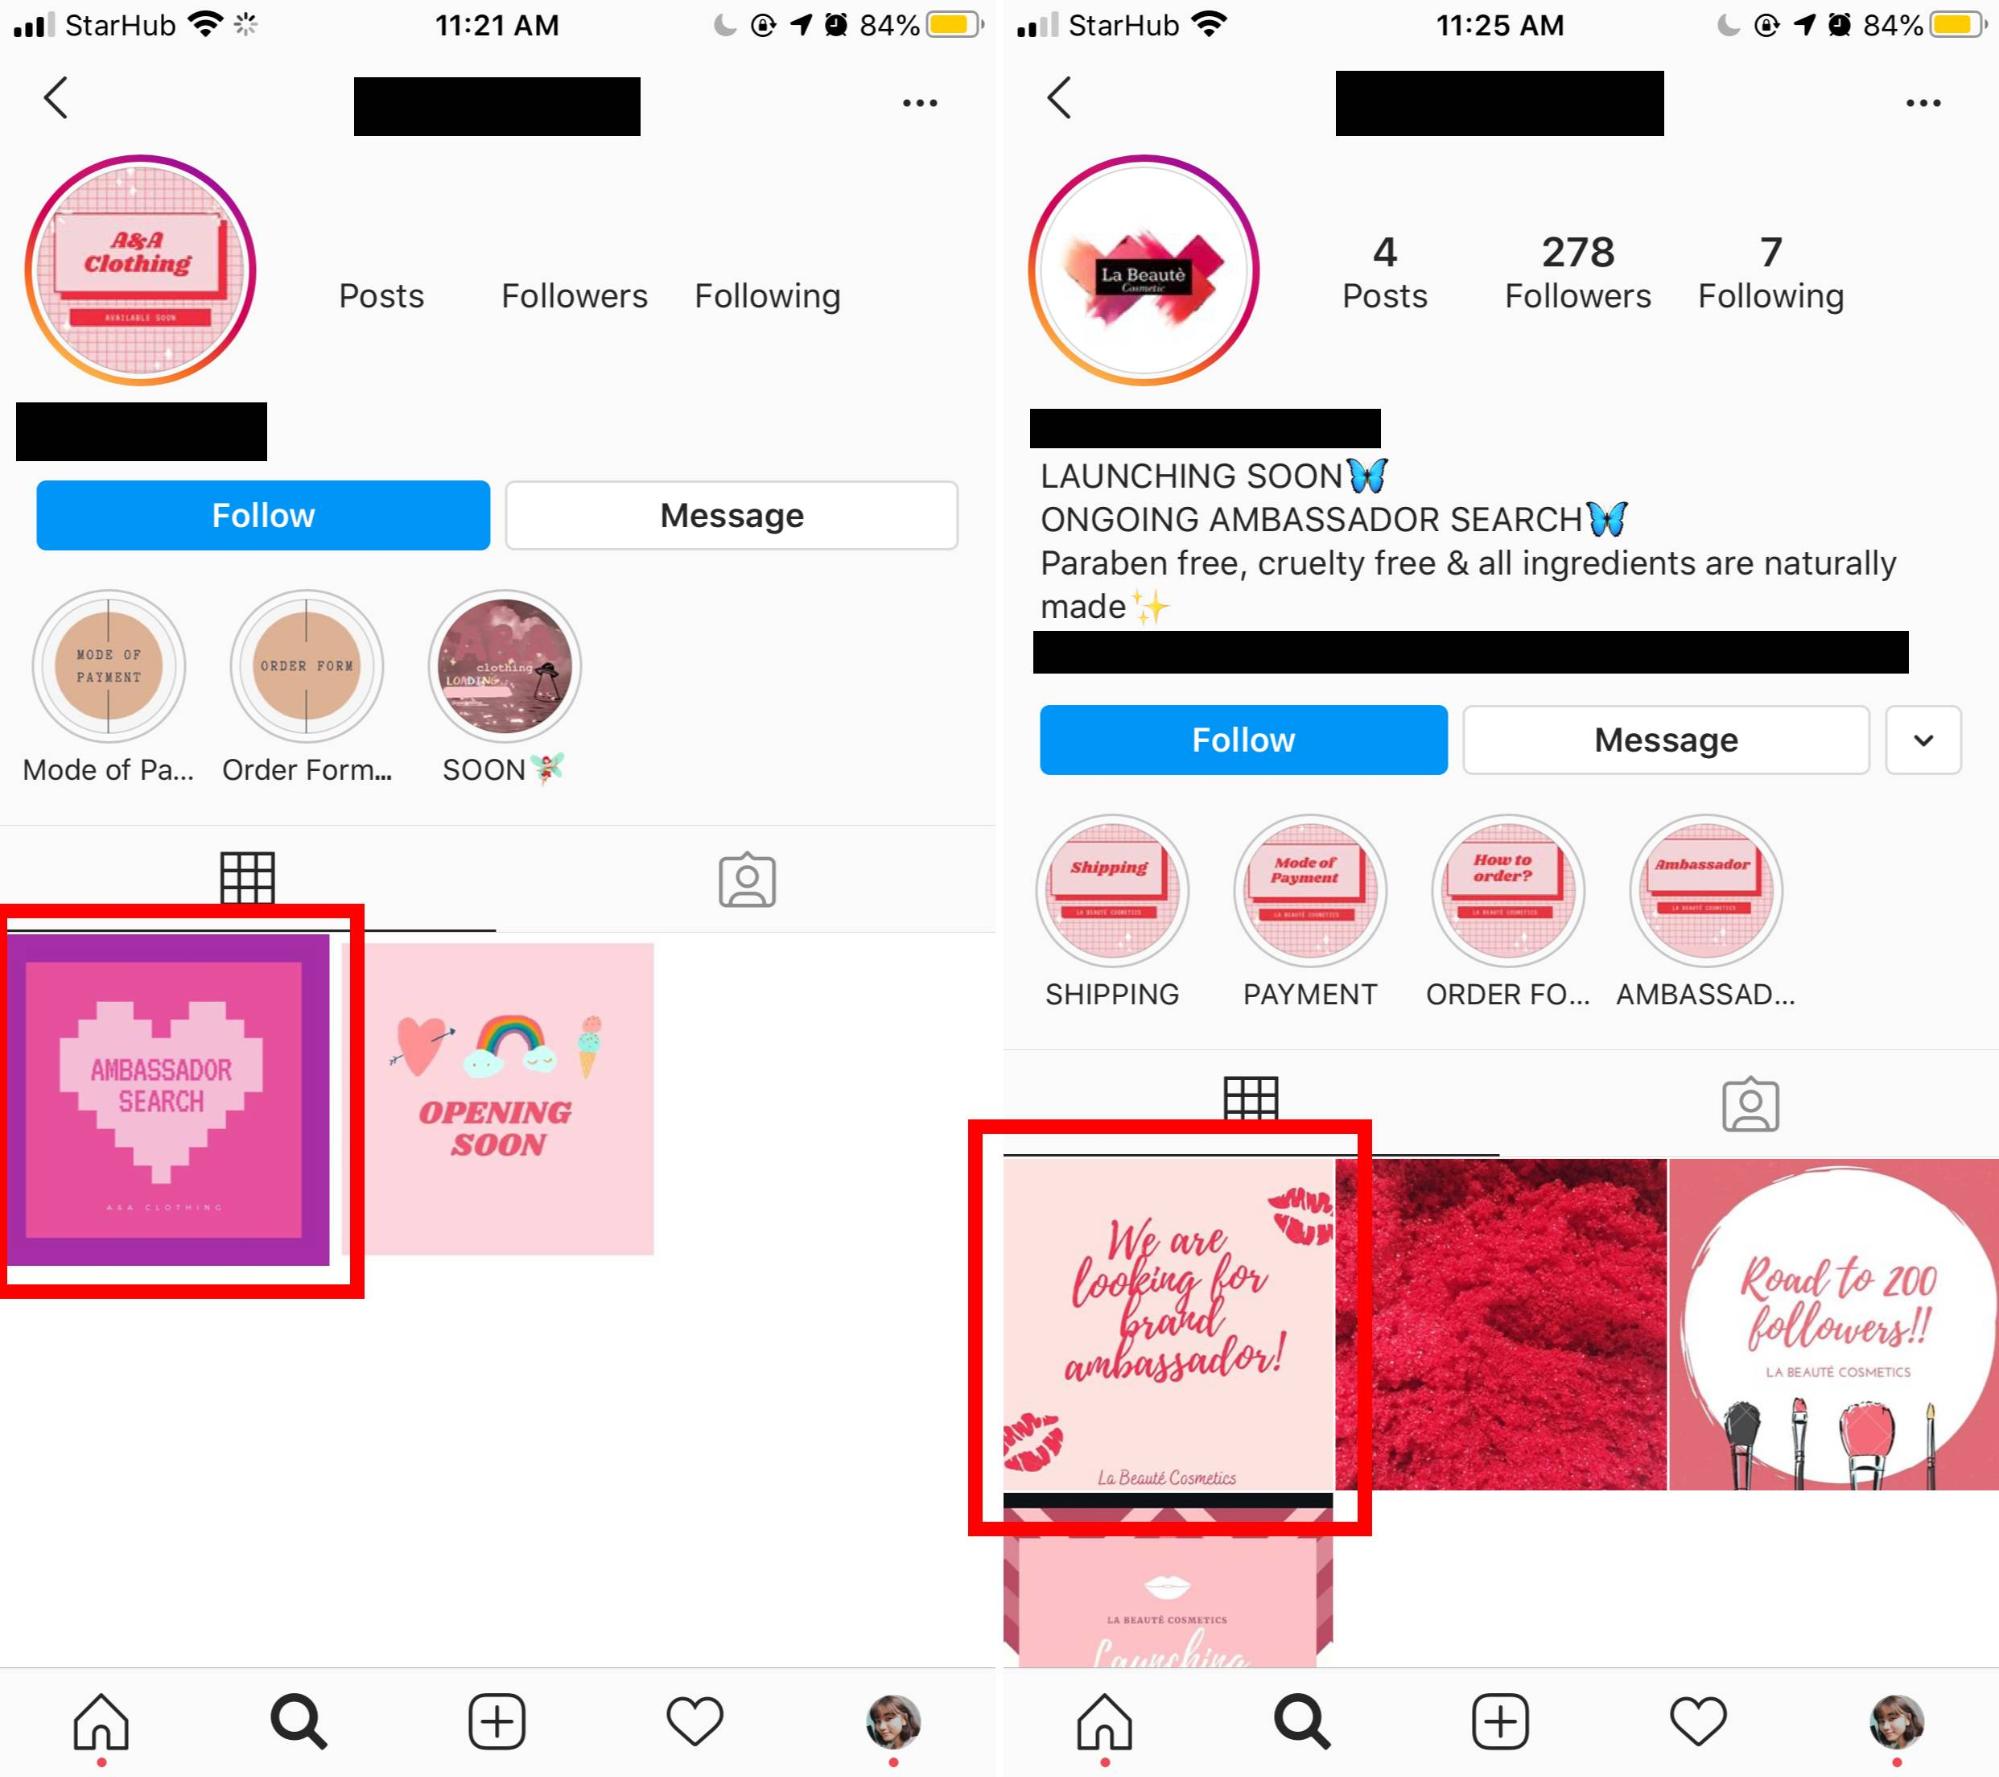 common scams in Singapore - Instagram influencer scams have been on the rise.